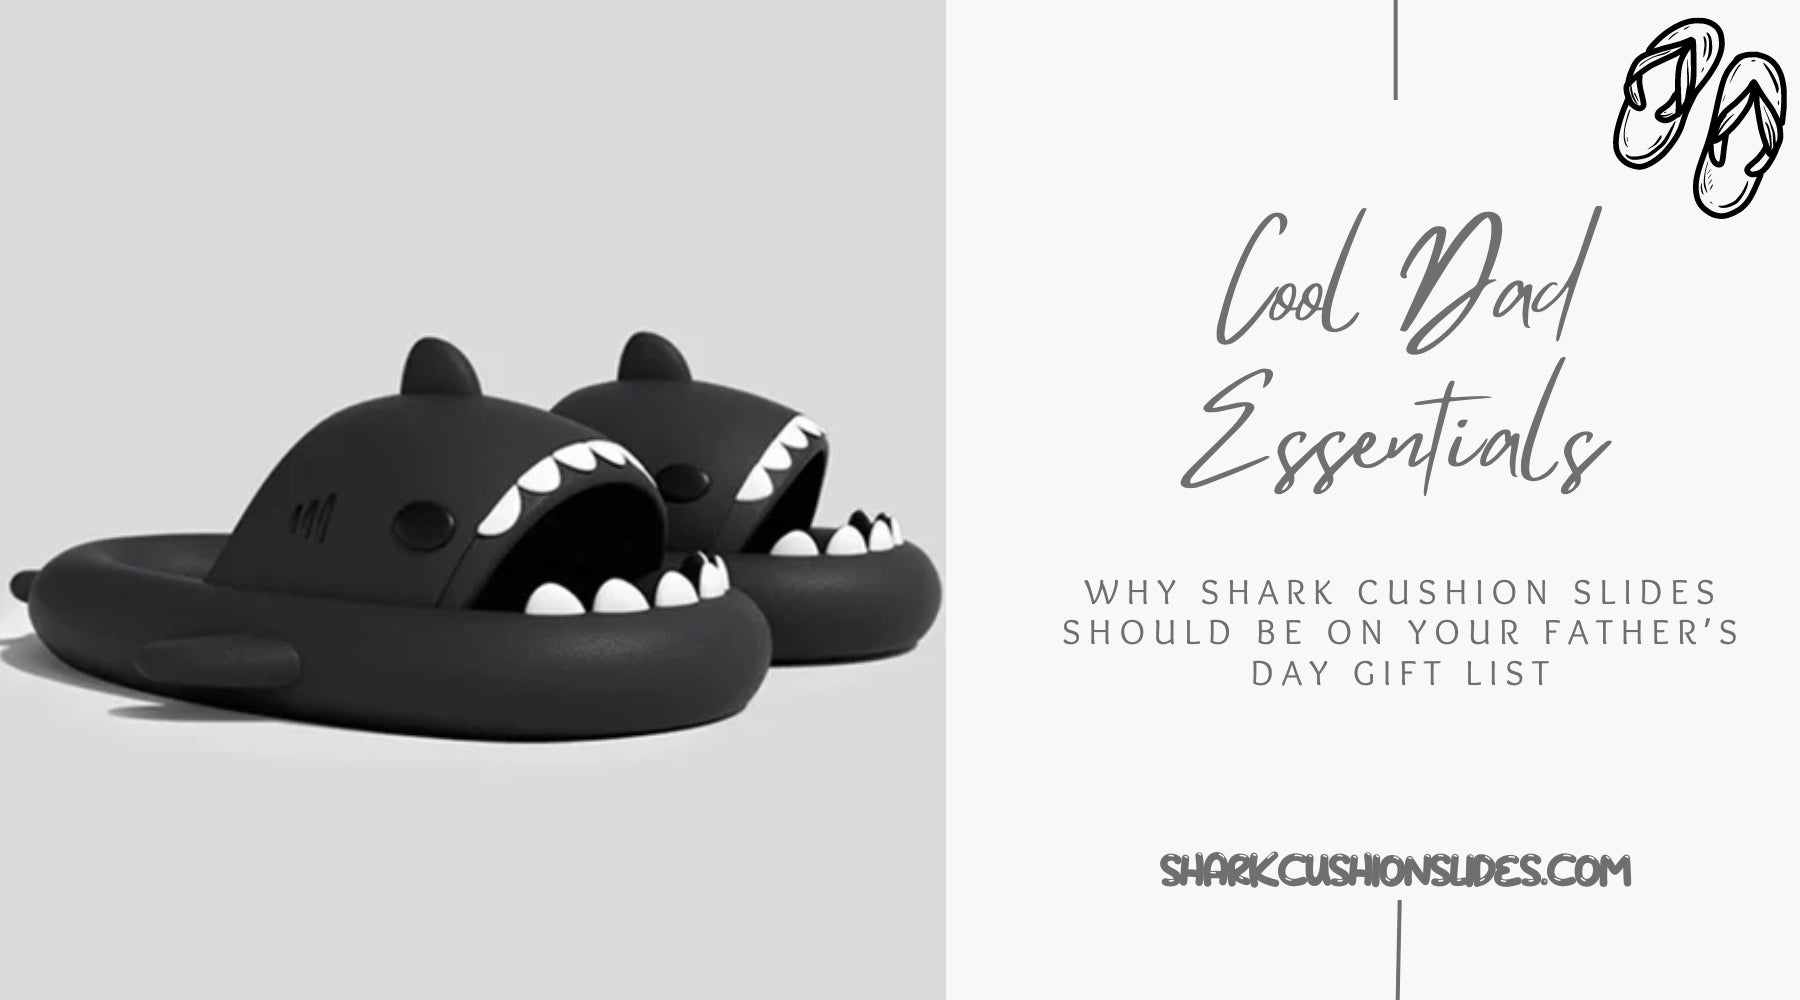 Cool Dad Essentials: Why Shark Cushion Slides Should Be on Your Father’s Day Gift List